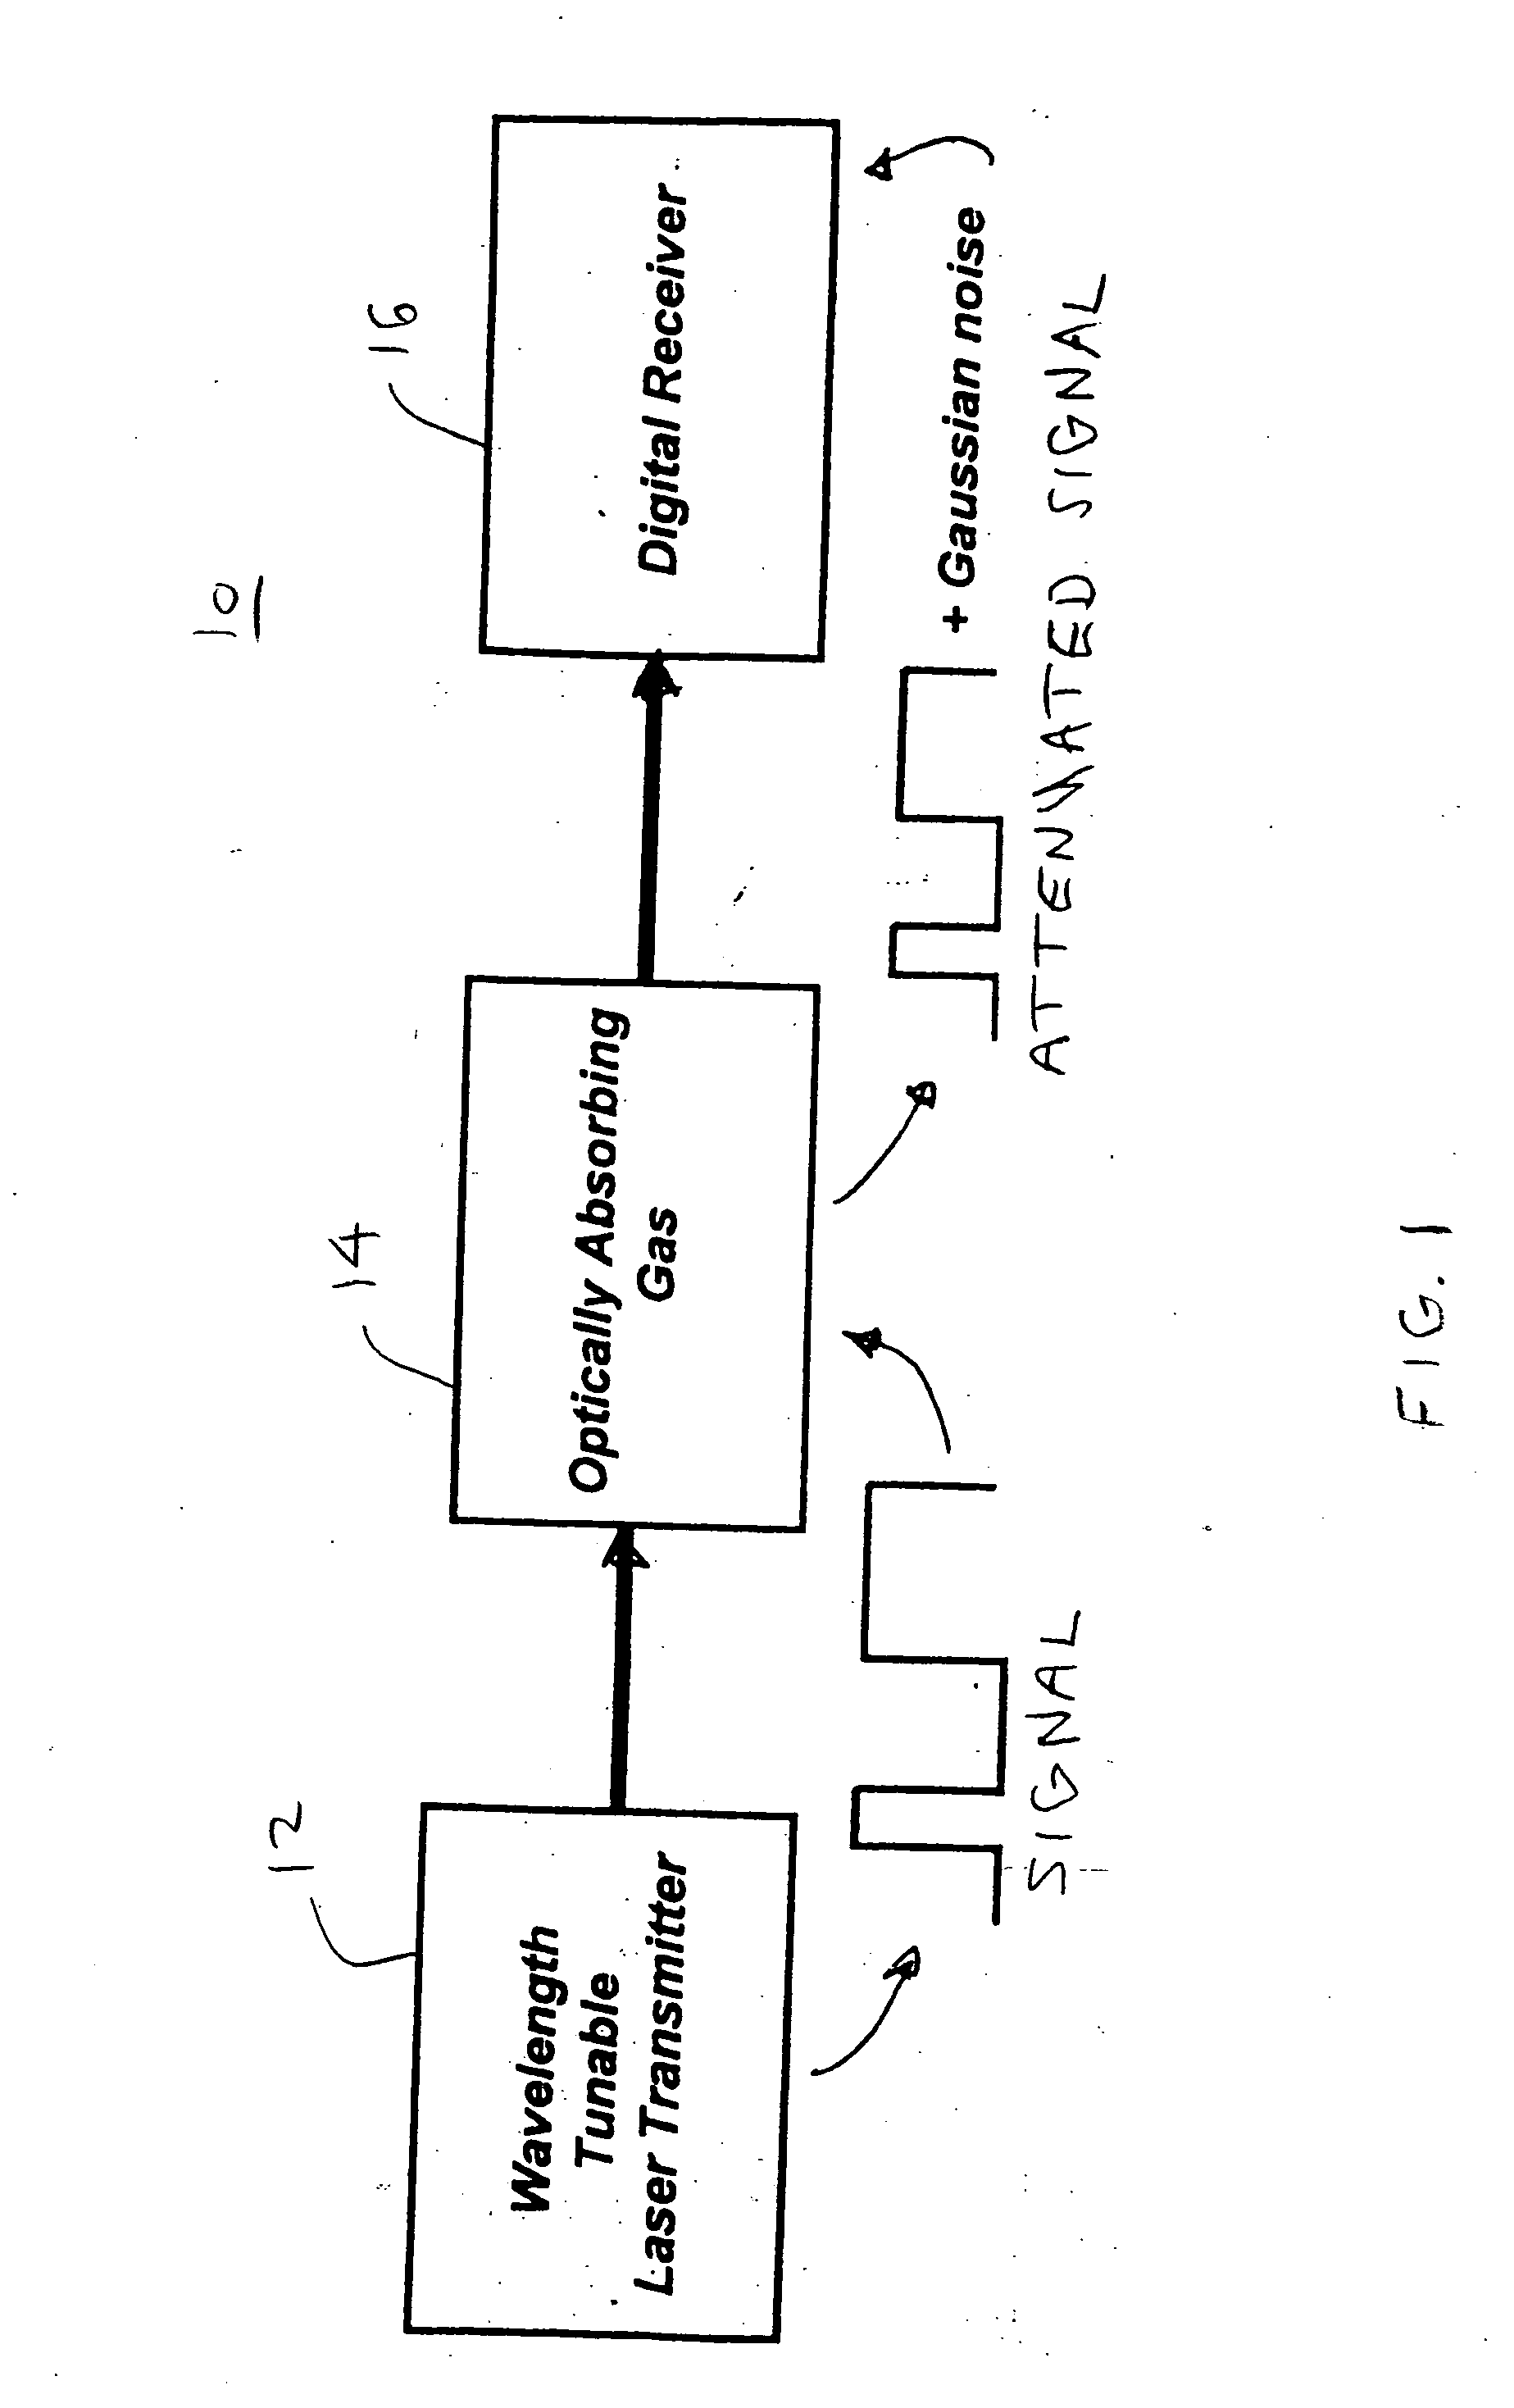 Method and system for measuring optical properties of a medium using digital communication processing techniques